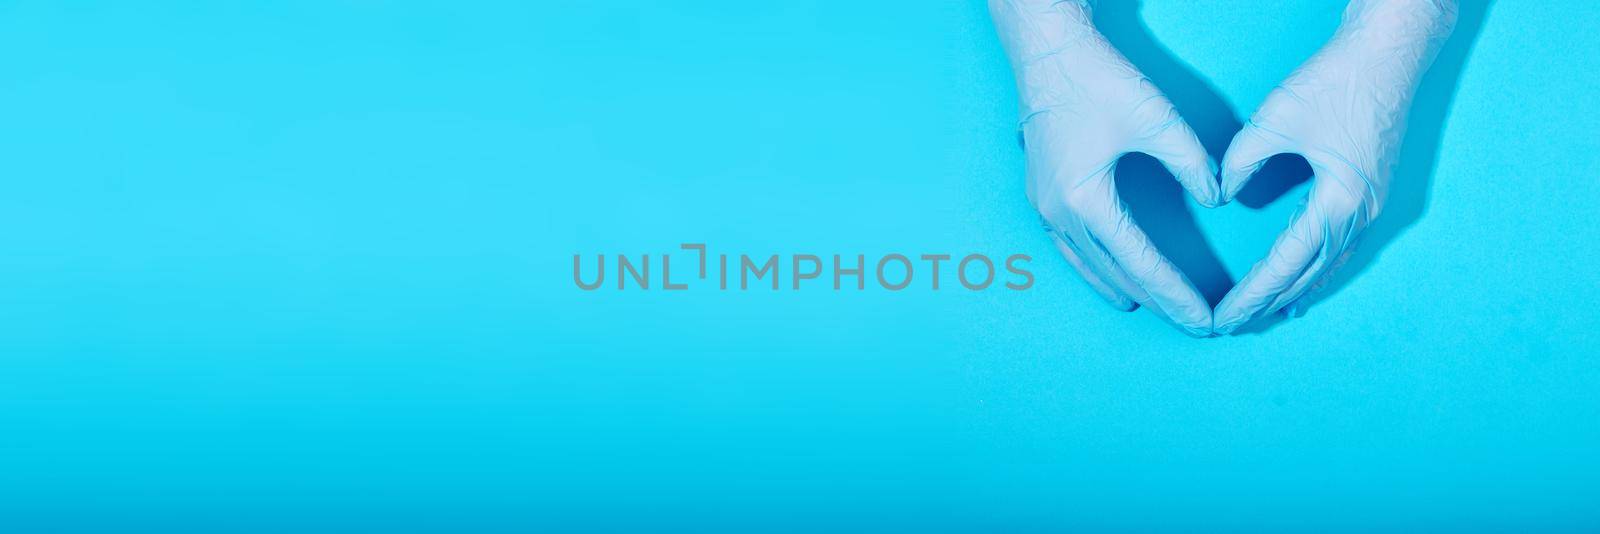 Hands in latex rubber gloves lie in the shape of a heart sign on a blue background with clear shadows. Banner for website with copy space